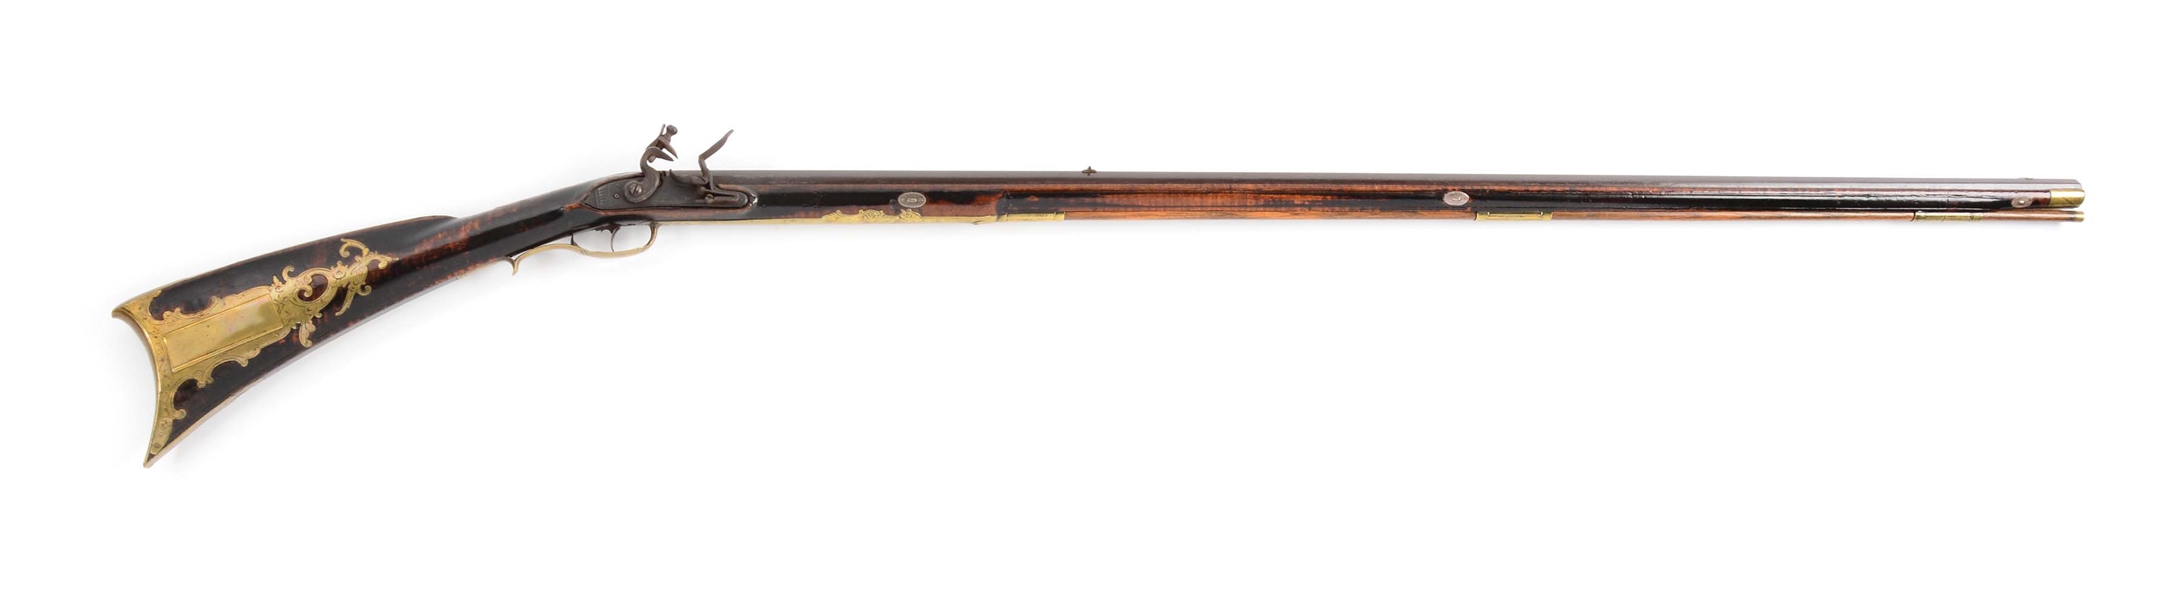 (A) FINELY INLAID KENTUCKY RIFLE SIGNED HENRY YOUNG.